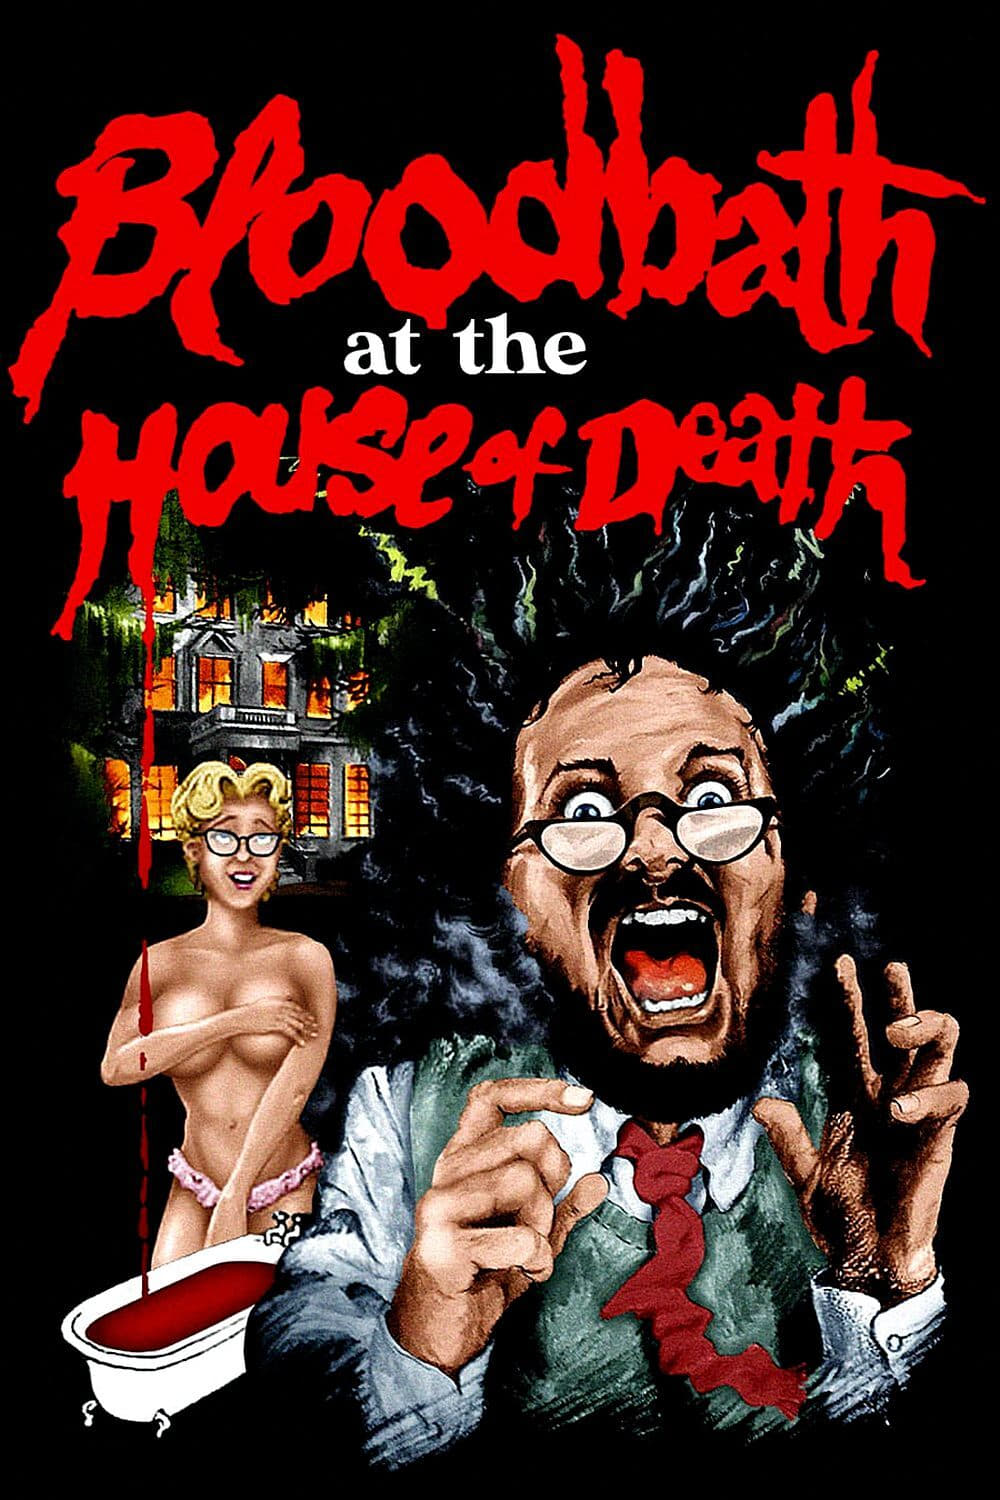 Bloodbath at the House of Death (1984)